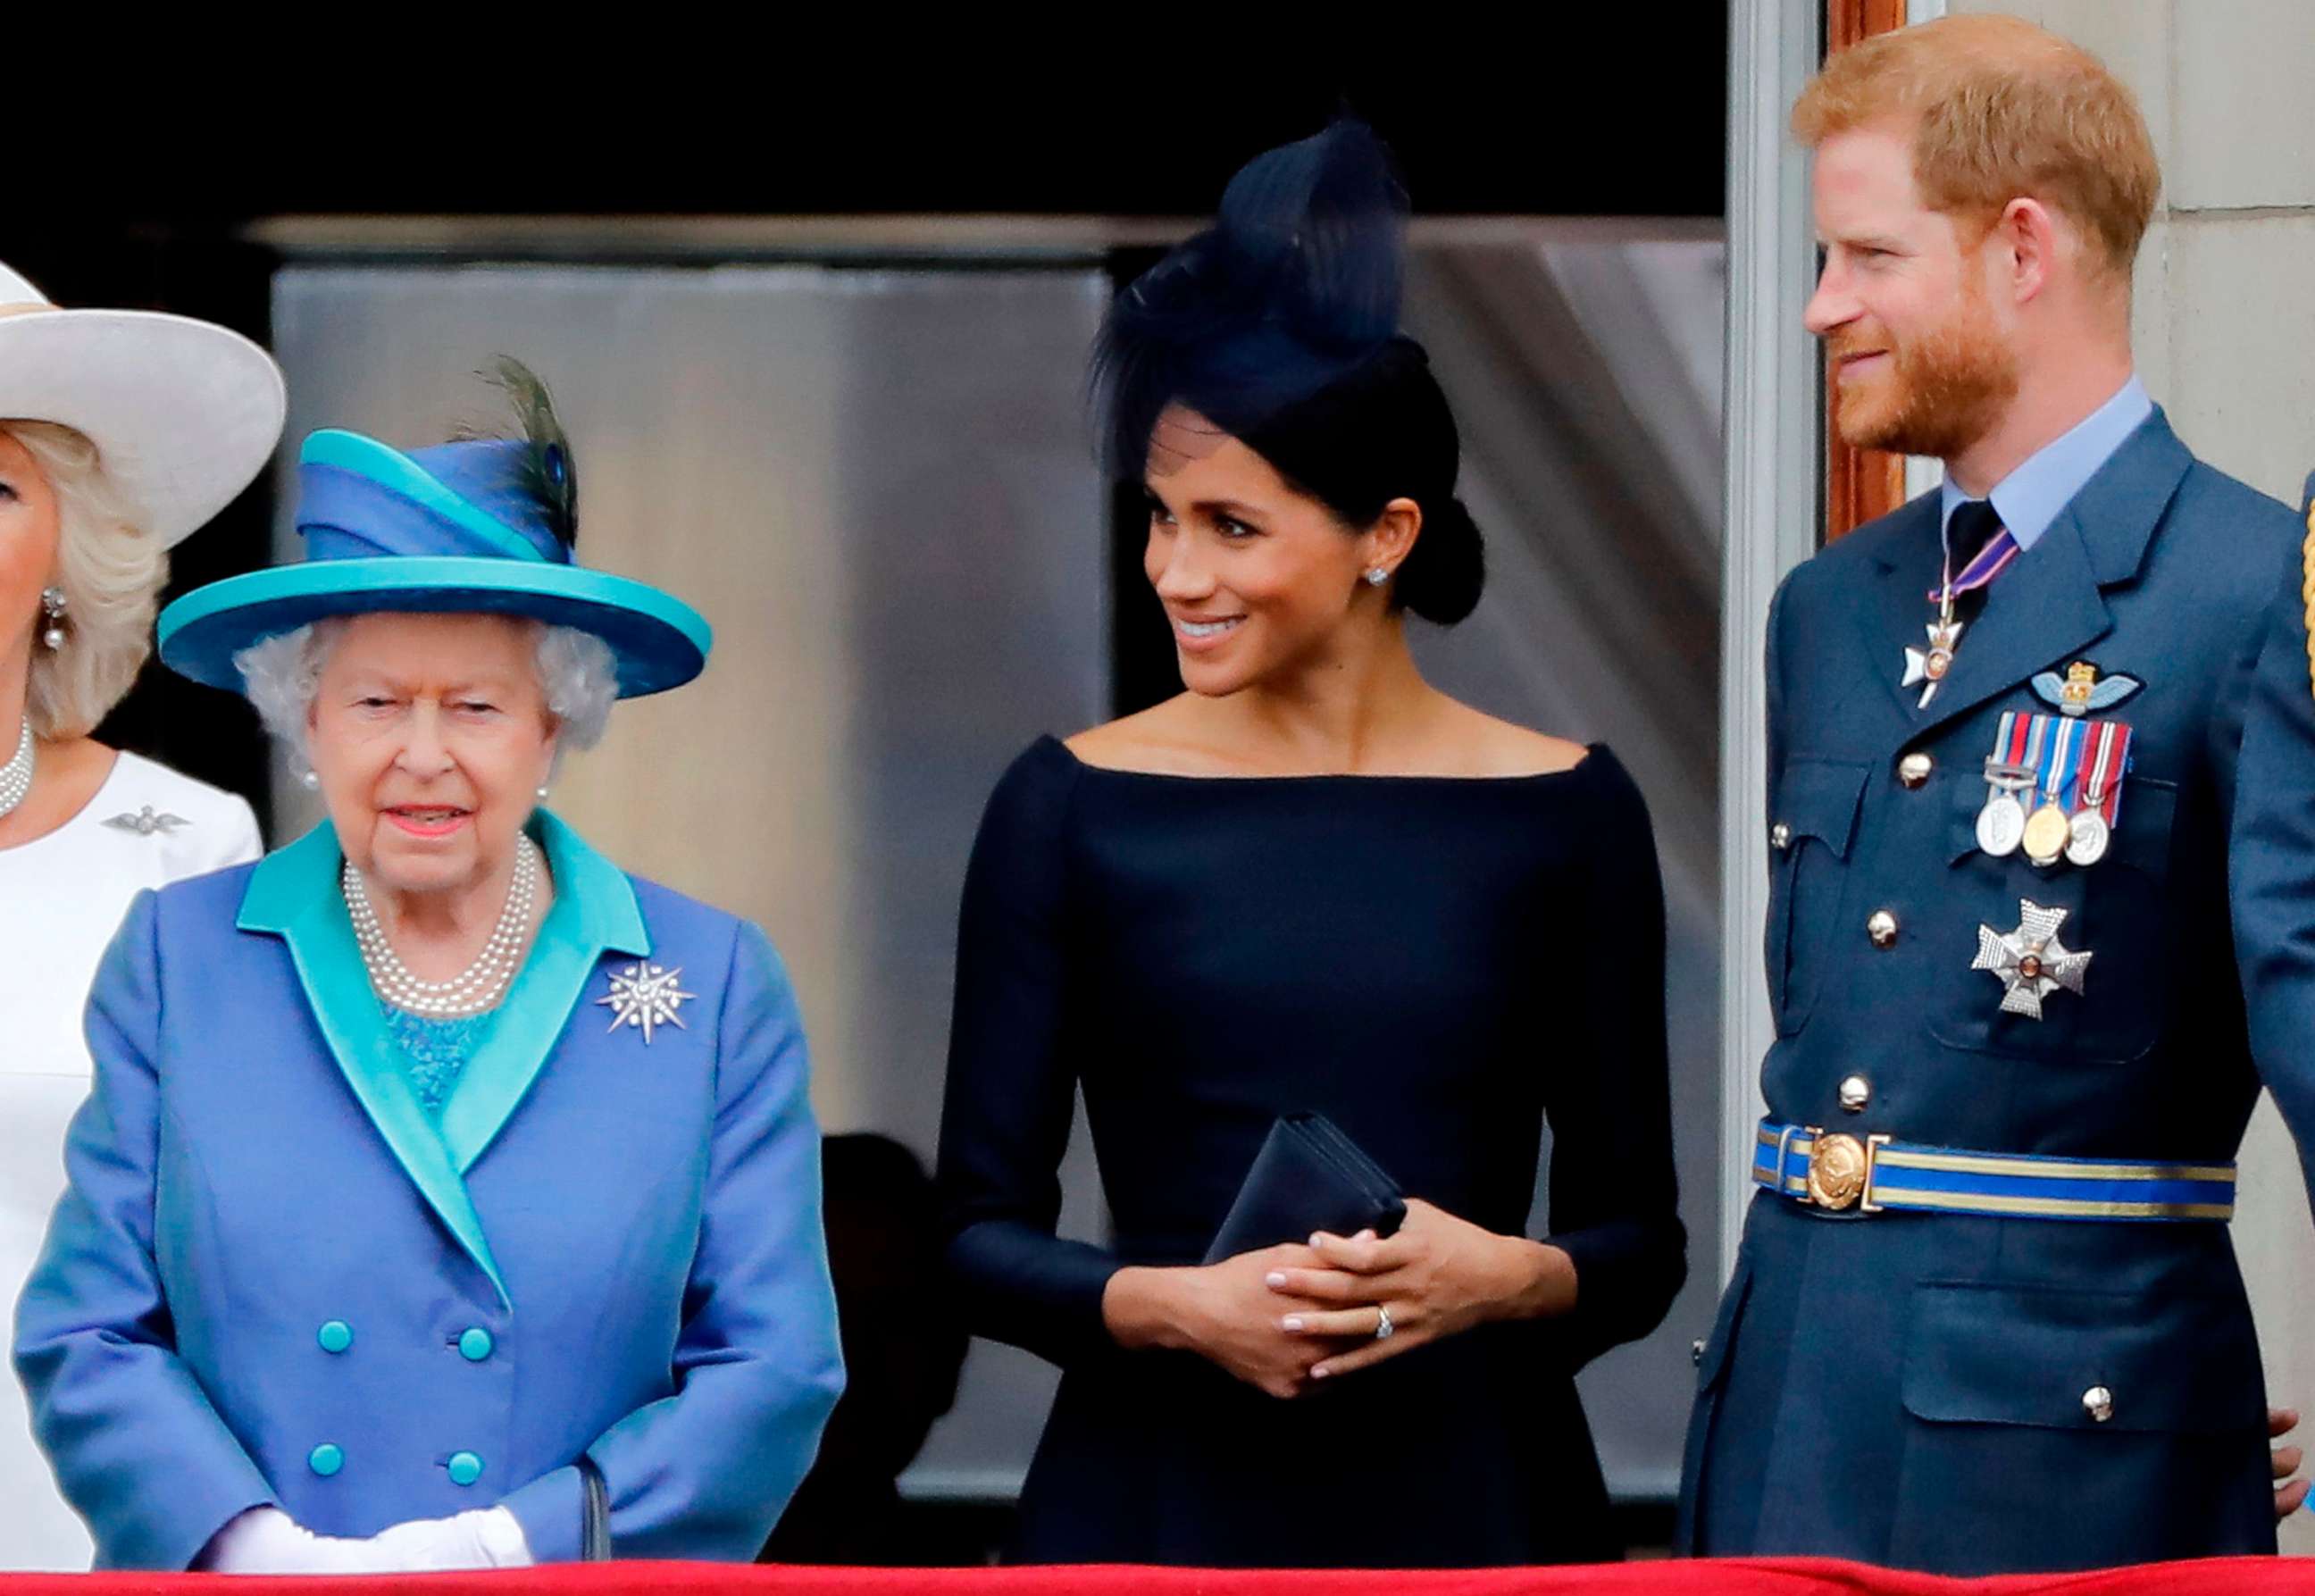 PHOTO: In this July 10, 2018, file photo, Queen Elizabeth II, Meghan, Duchess of Sussex, and  Prince Harry, Duke of Sussex stand on the balcony of Buckingham Palace in London to watch a military fly-past to mark the centenary of the Royal Air Force.